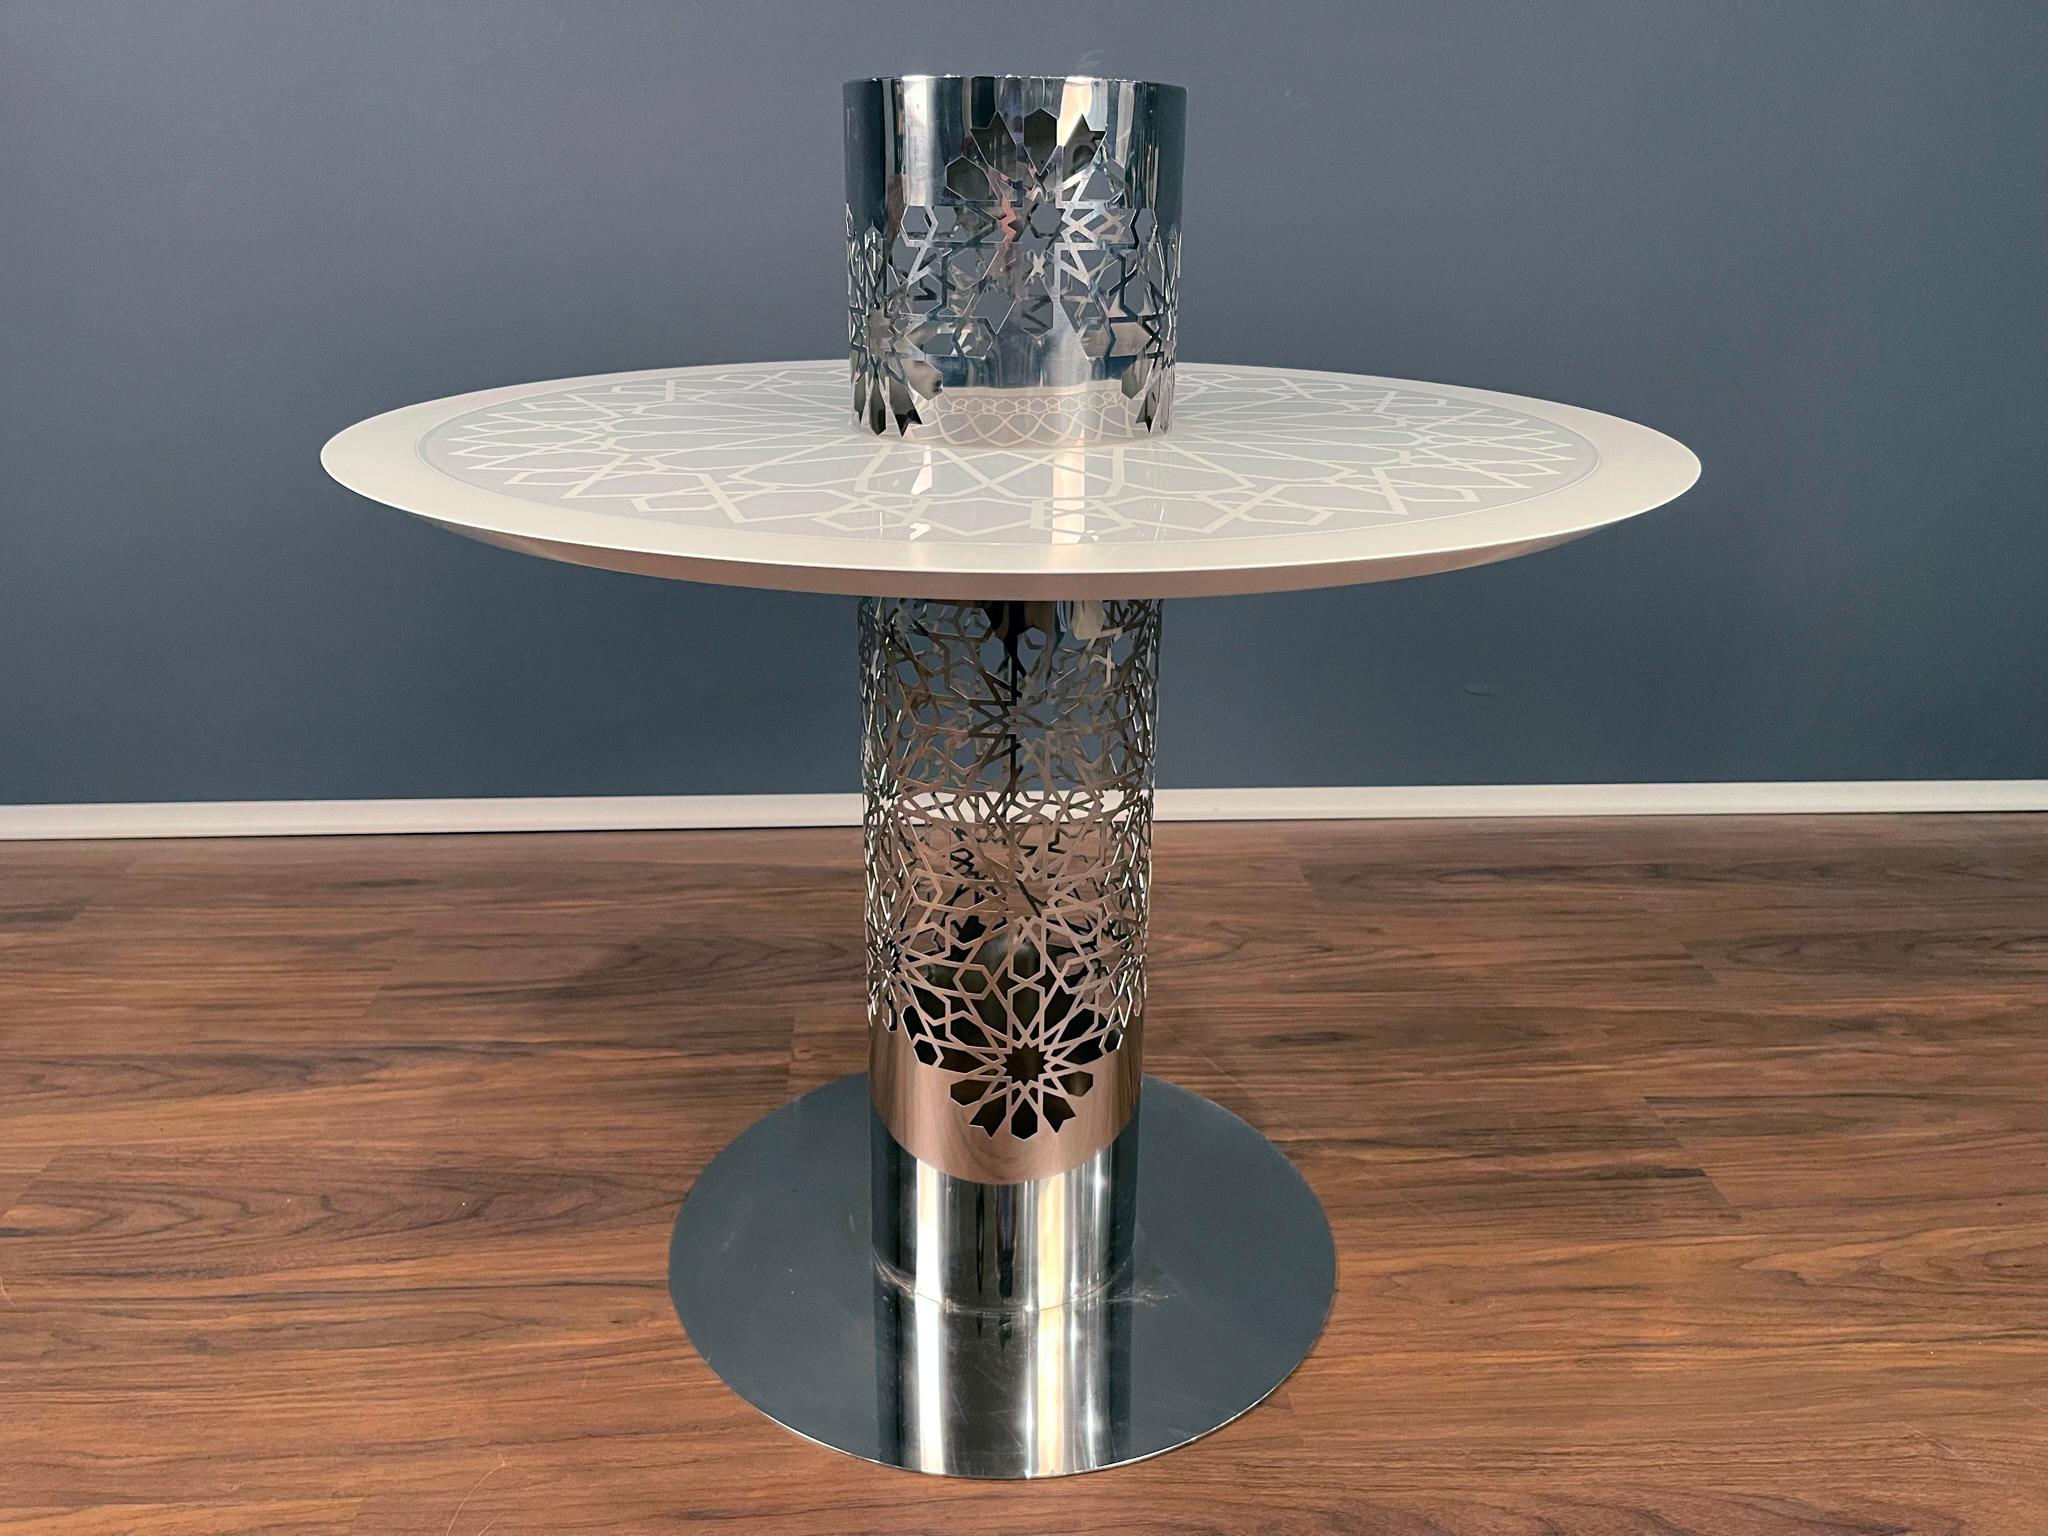 Frosted 21st Century Modern Center Table Stainless Steel and White Glass Showroom Sample